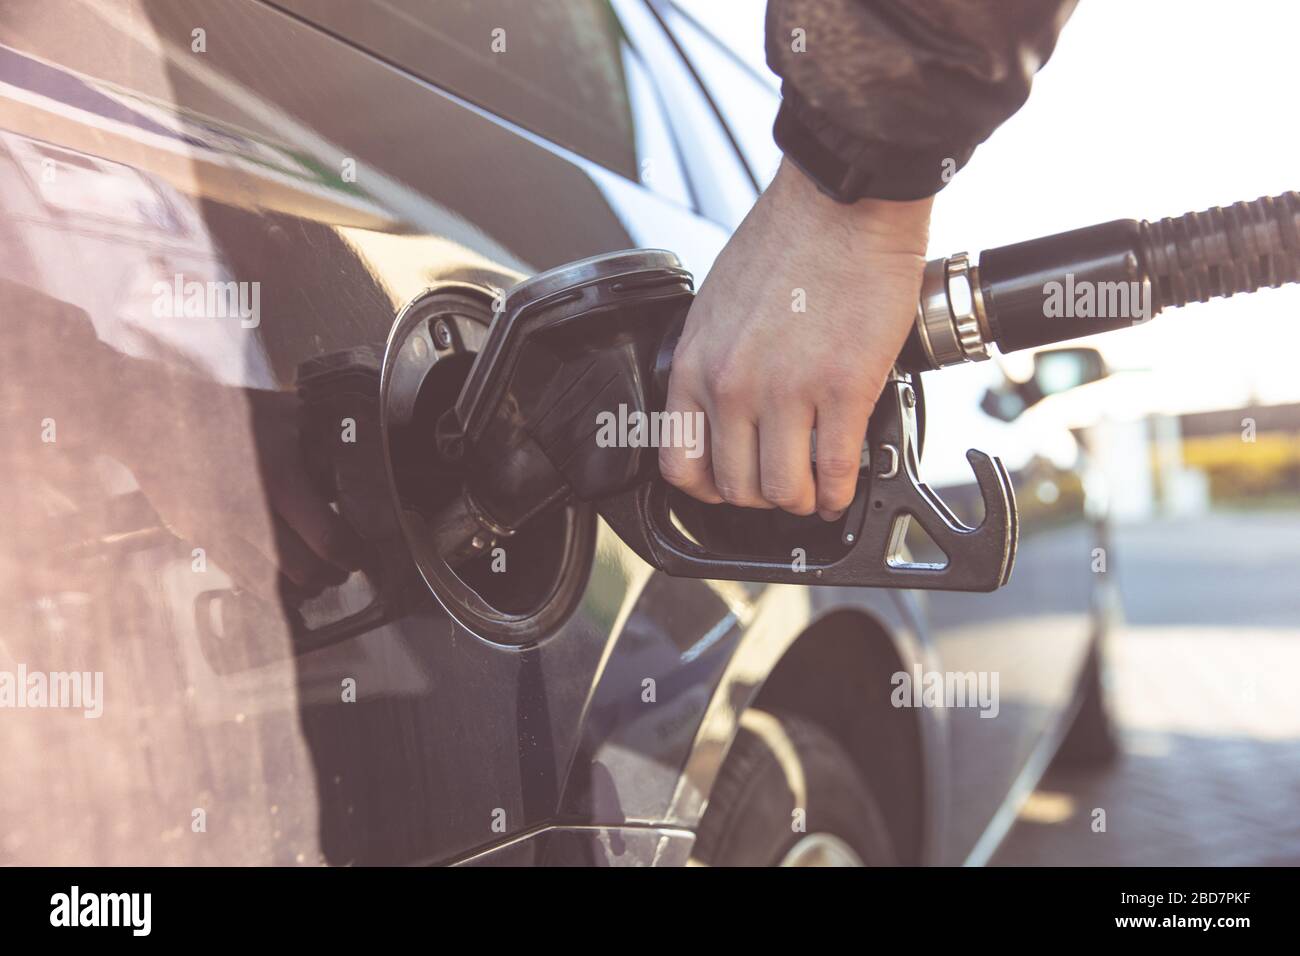 refueling a passenger car tank at a gas station Stock Photo